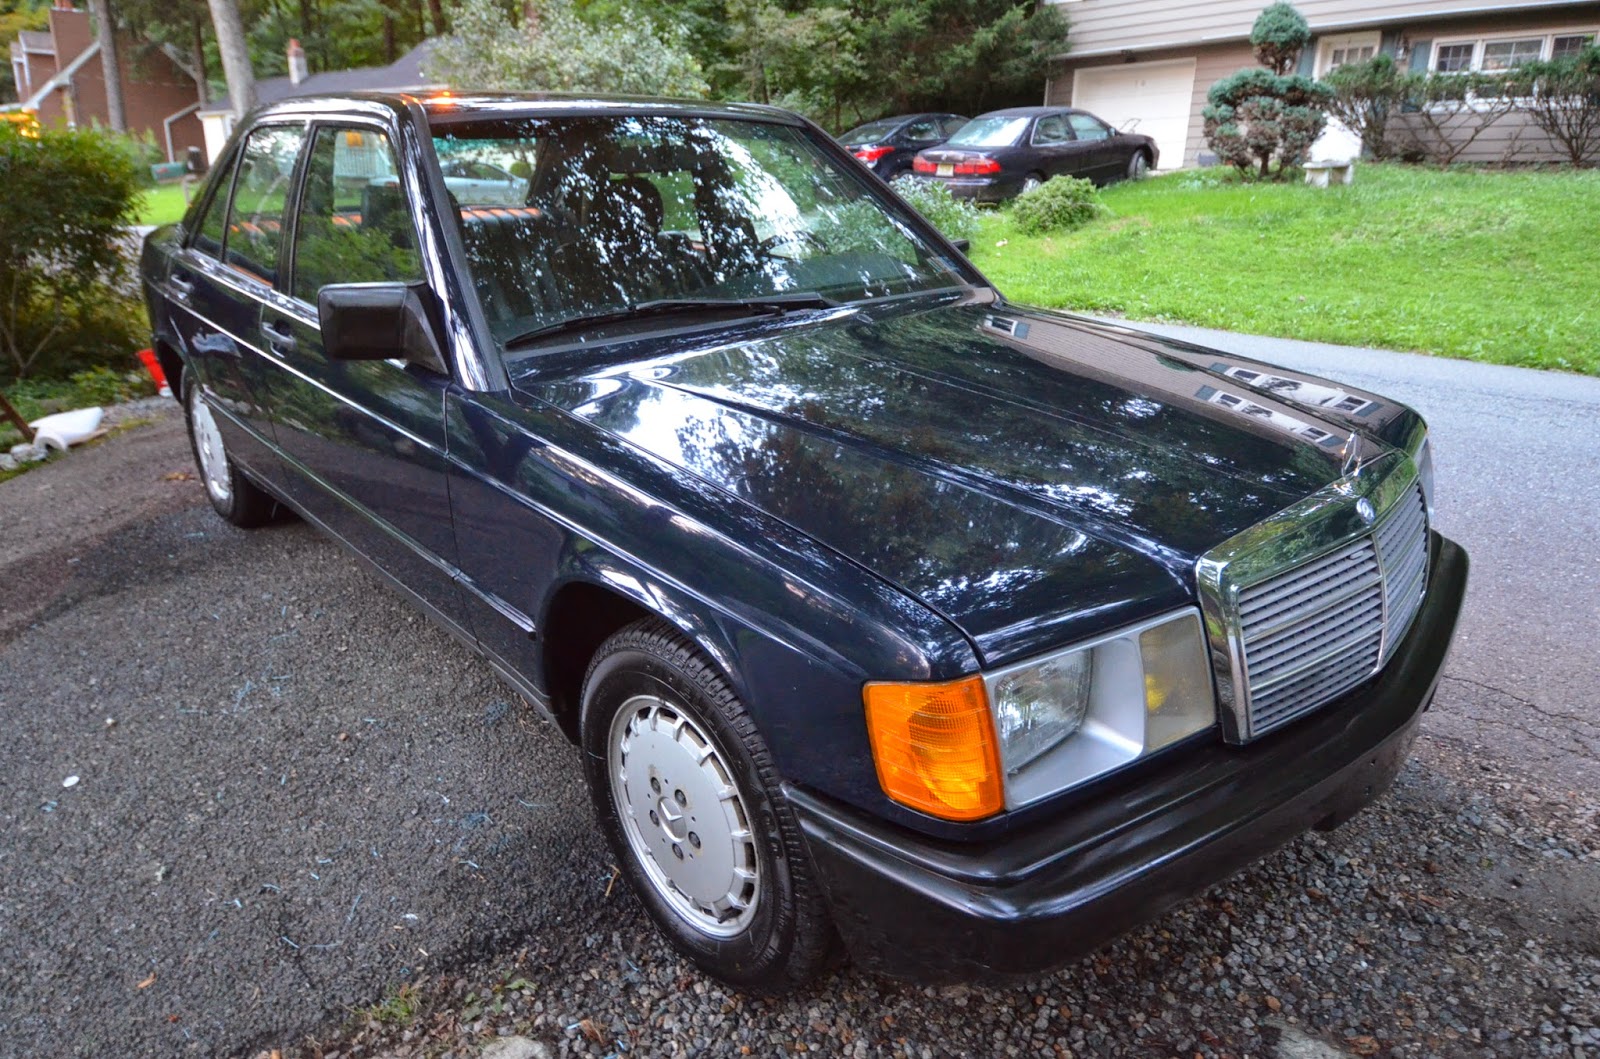 TheClassicCarFactory.com : Mercedes Benz w201 190e 2.3 / 2.6 / Cosworth / Sportline  Limited Edition Review